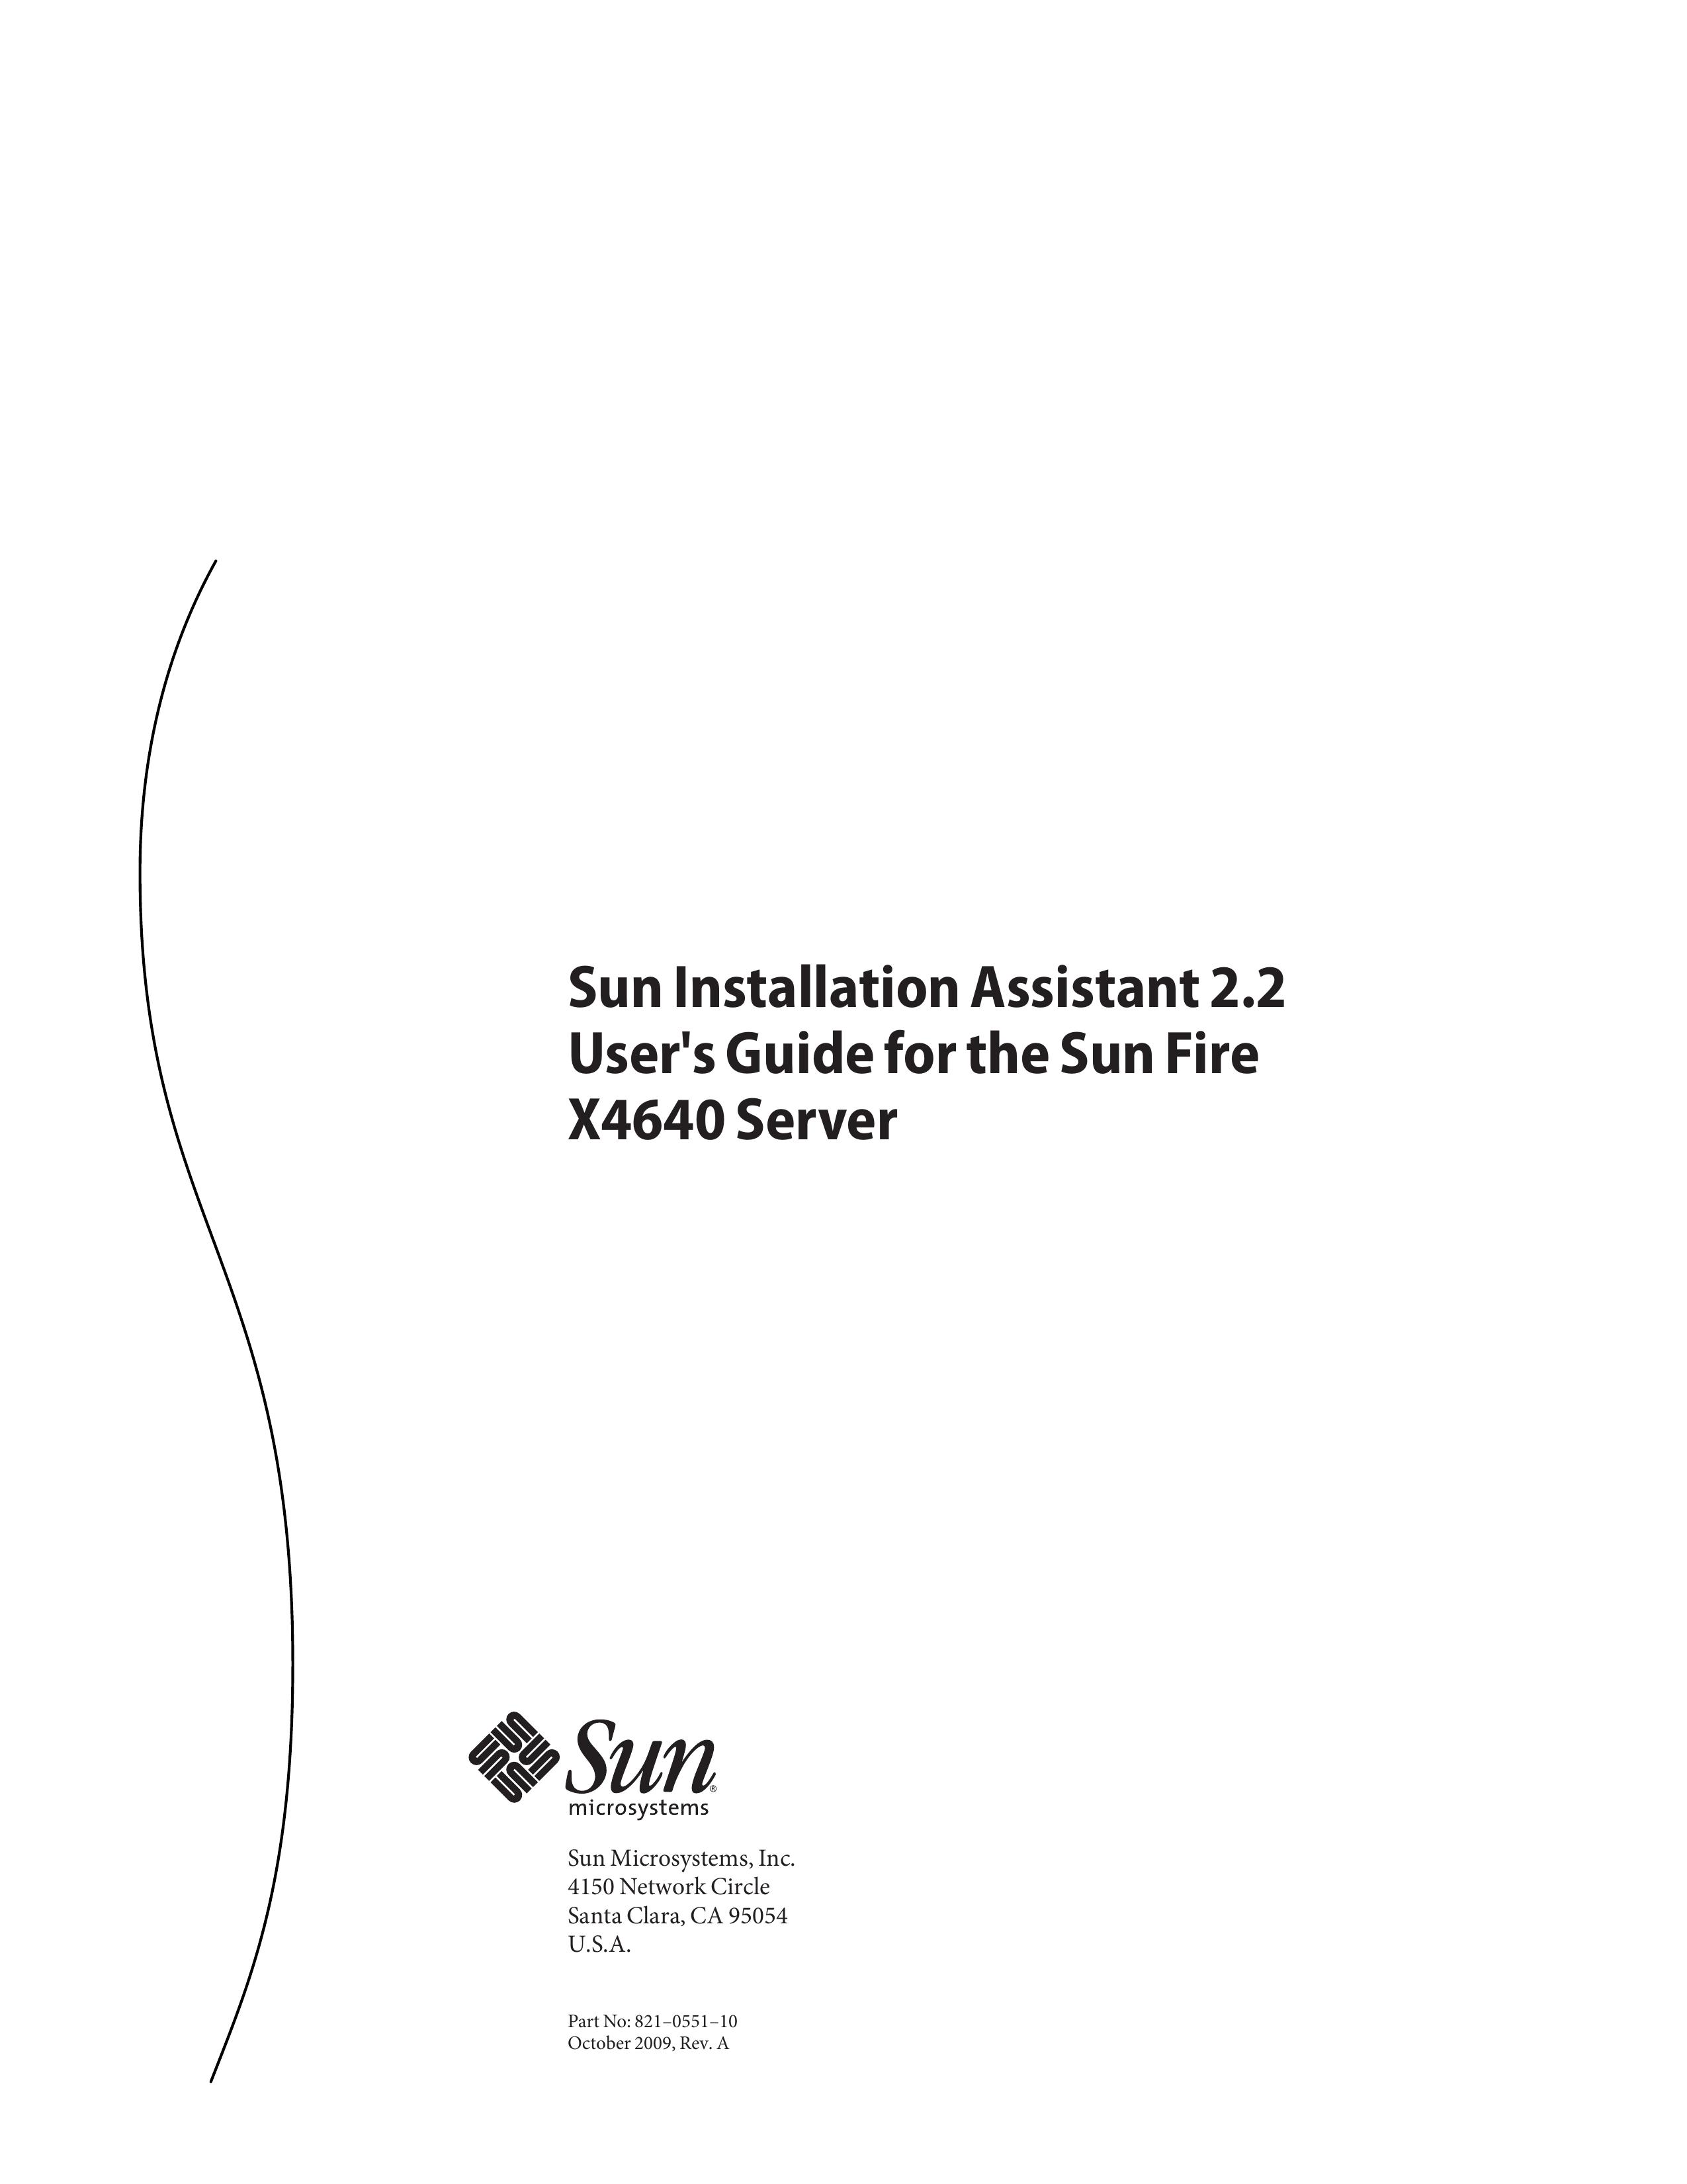 Sun Microsystems X4640 Clothes Dryer User Manual